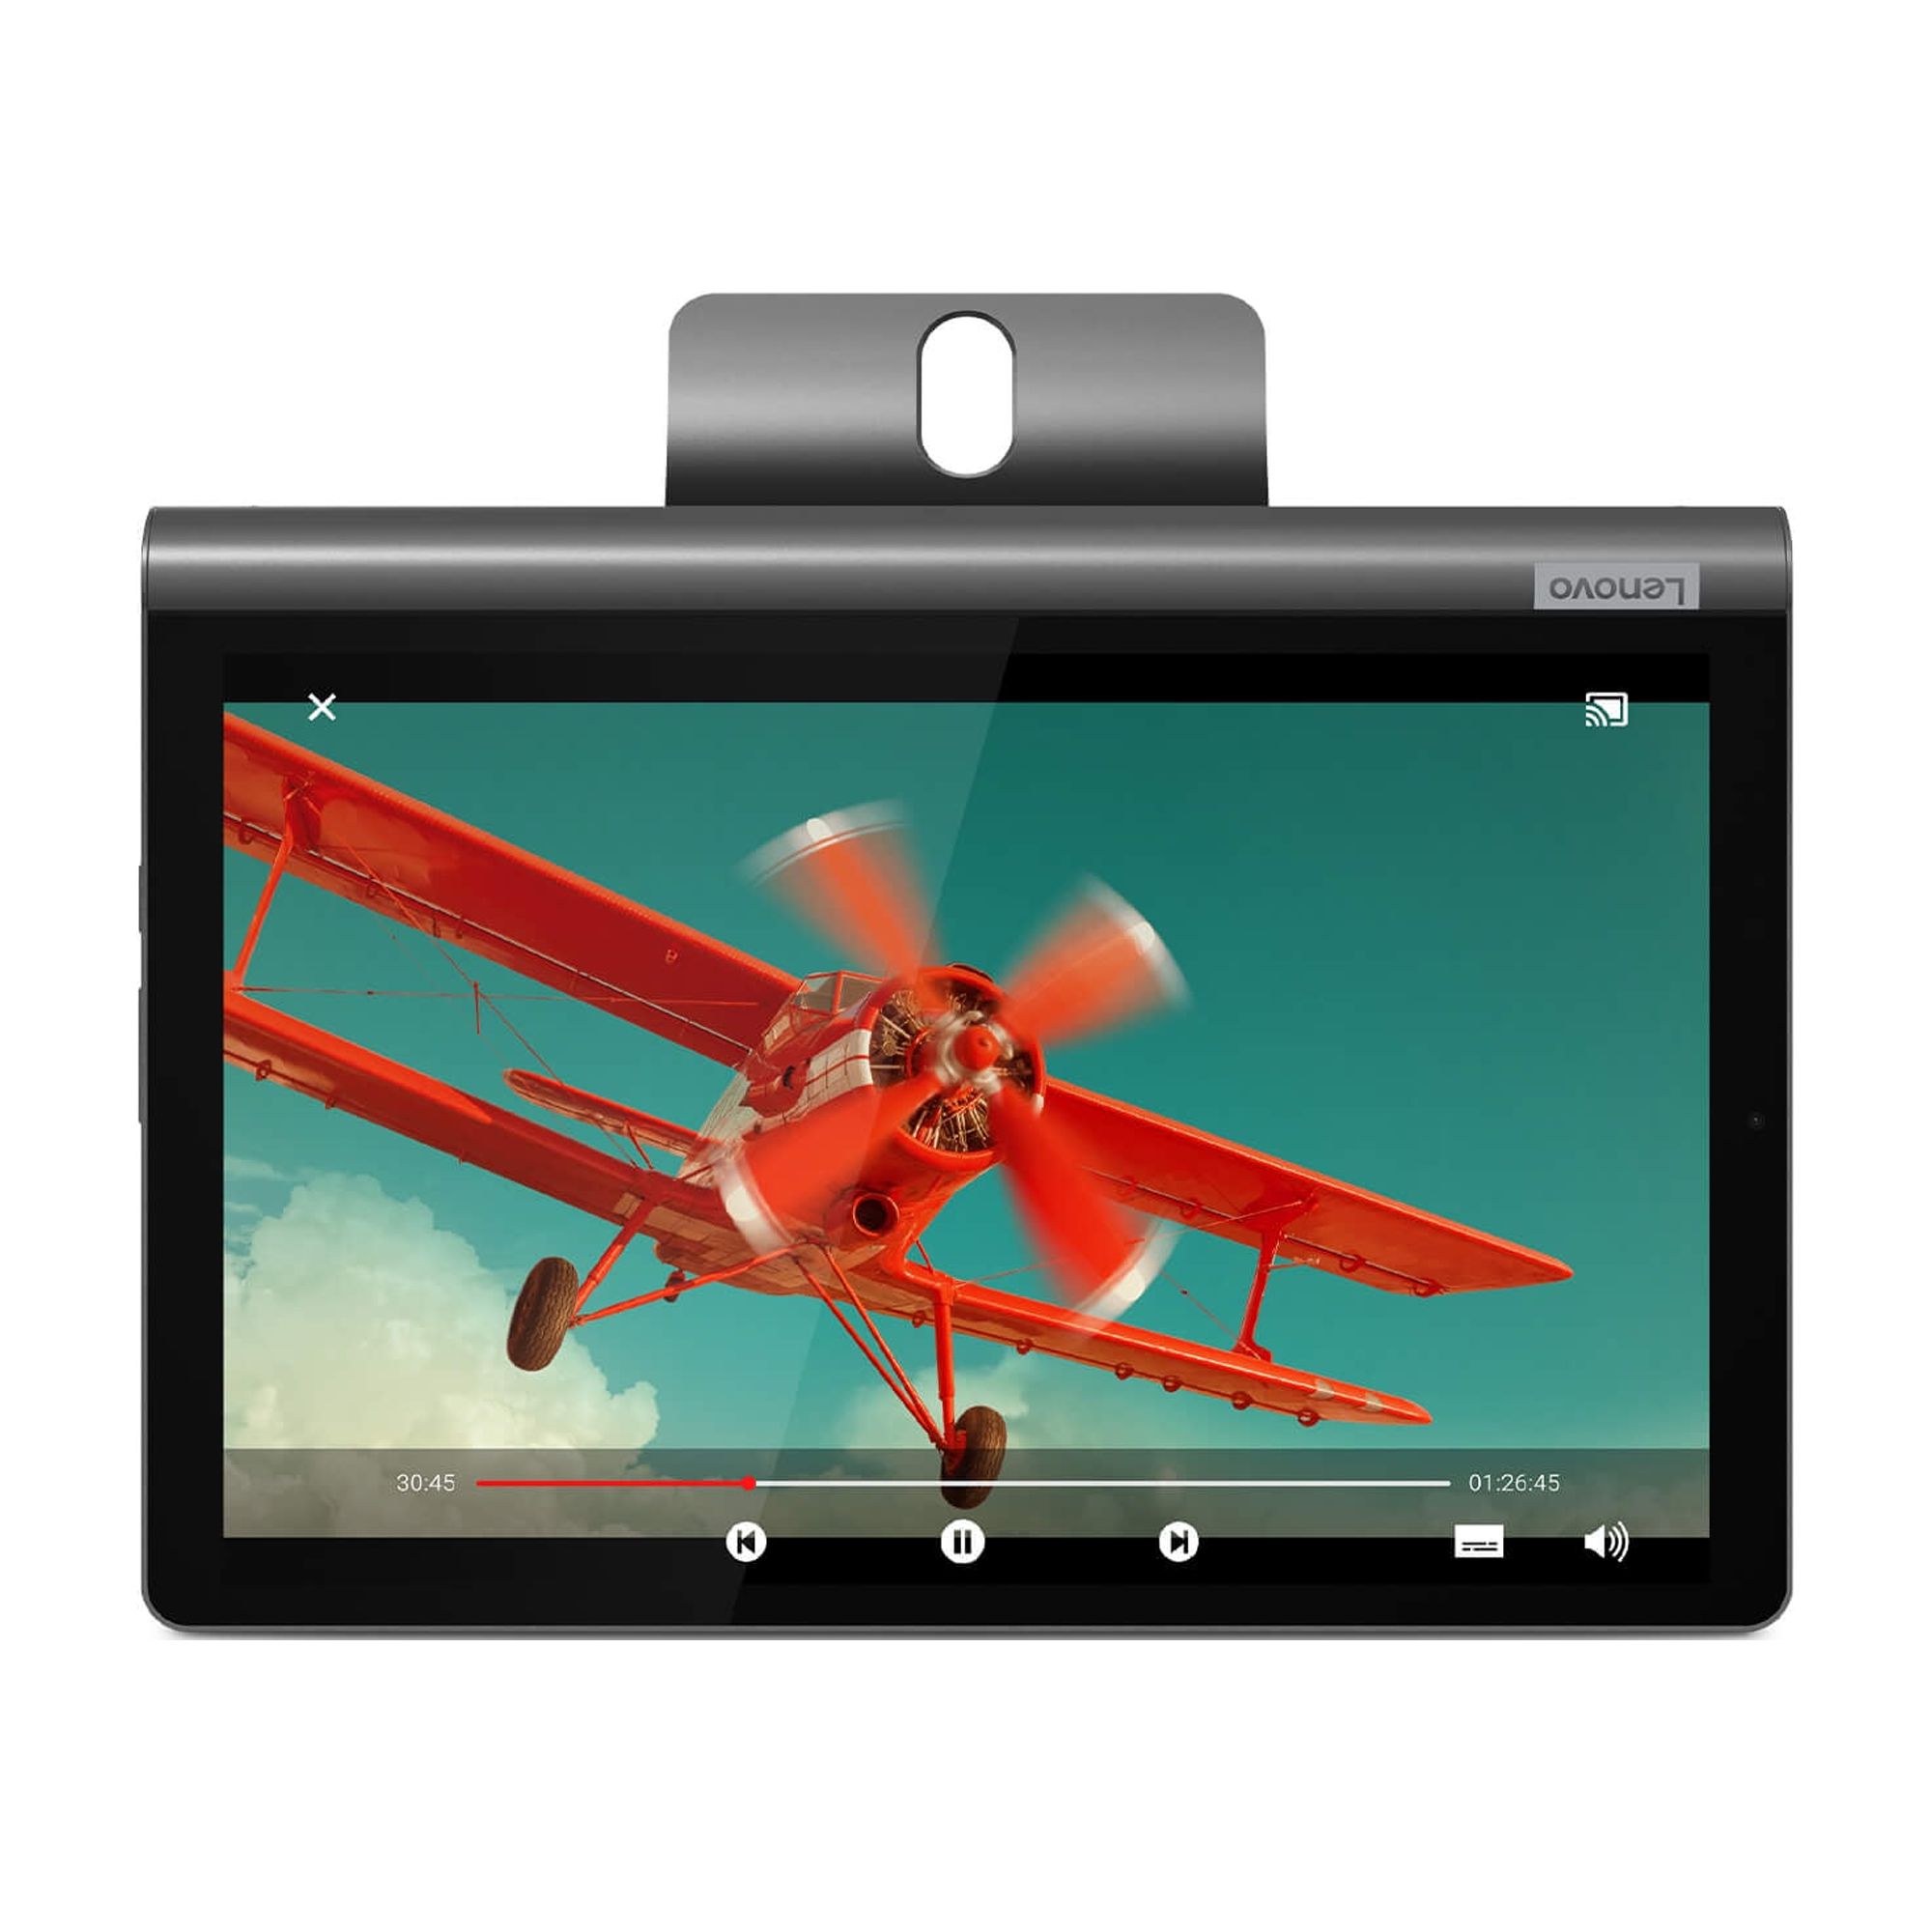 Lenovo Yoga Smart Tab in Gray, 10.1" FHD IPS Touch, 4GB, 64GB eMMC, Android Pie - image 1 of 5